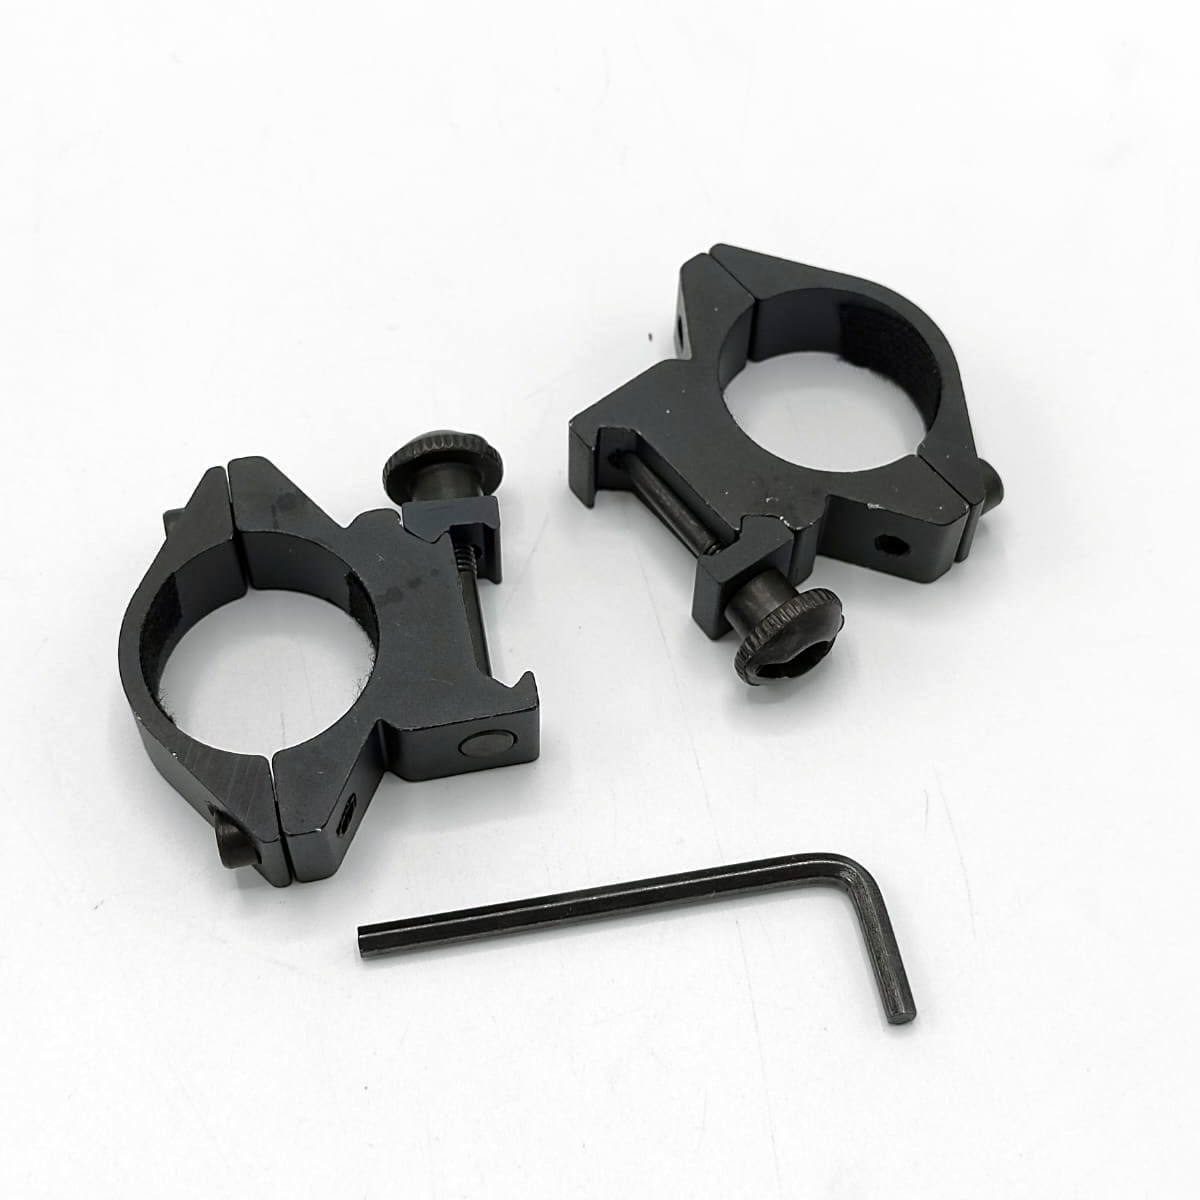 20mm mounts for scope